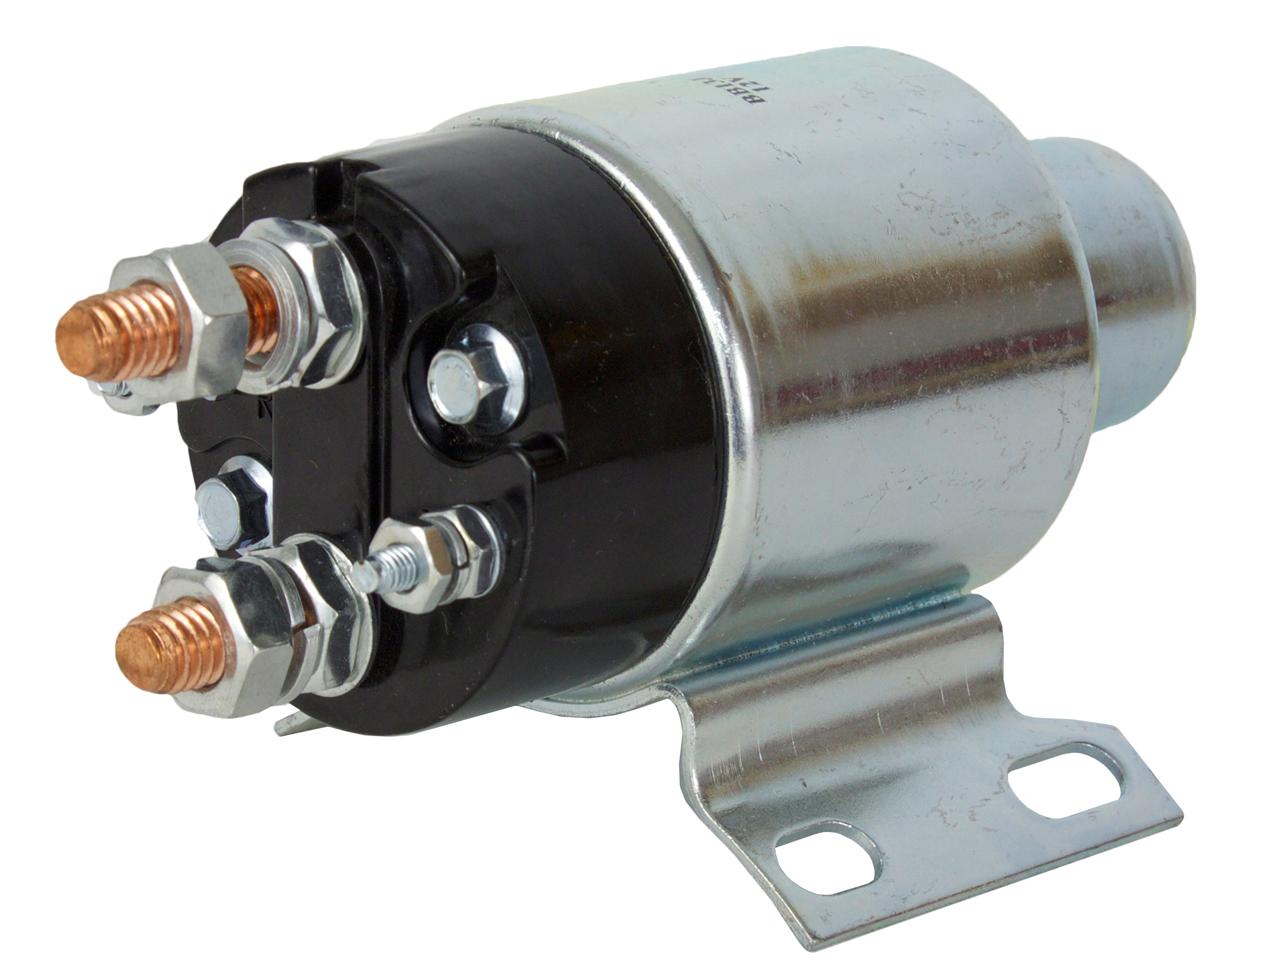 Rareelectrical NEW STARTER SOLENOID COMPATIBLE WITH ELGIN SWEEPER EDUCTOR FLEETWING H STREET KING J WHITE WING